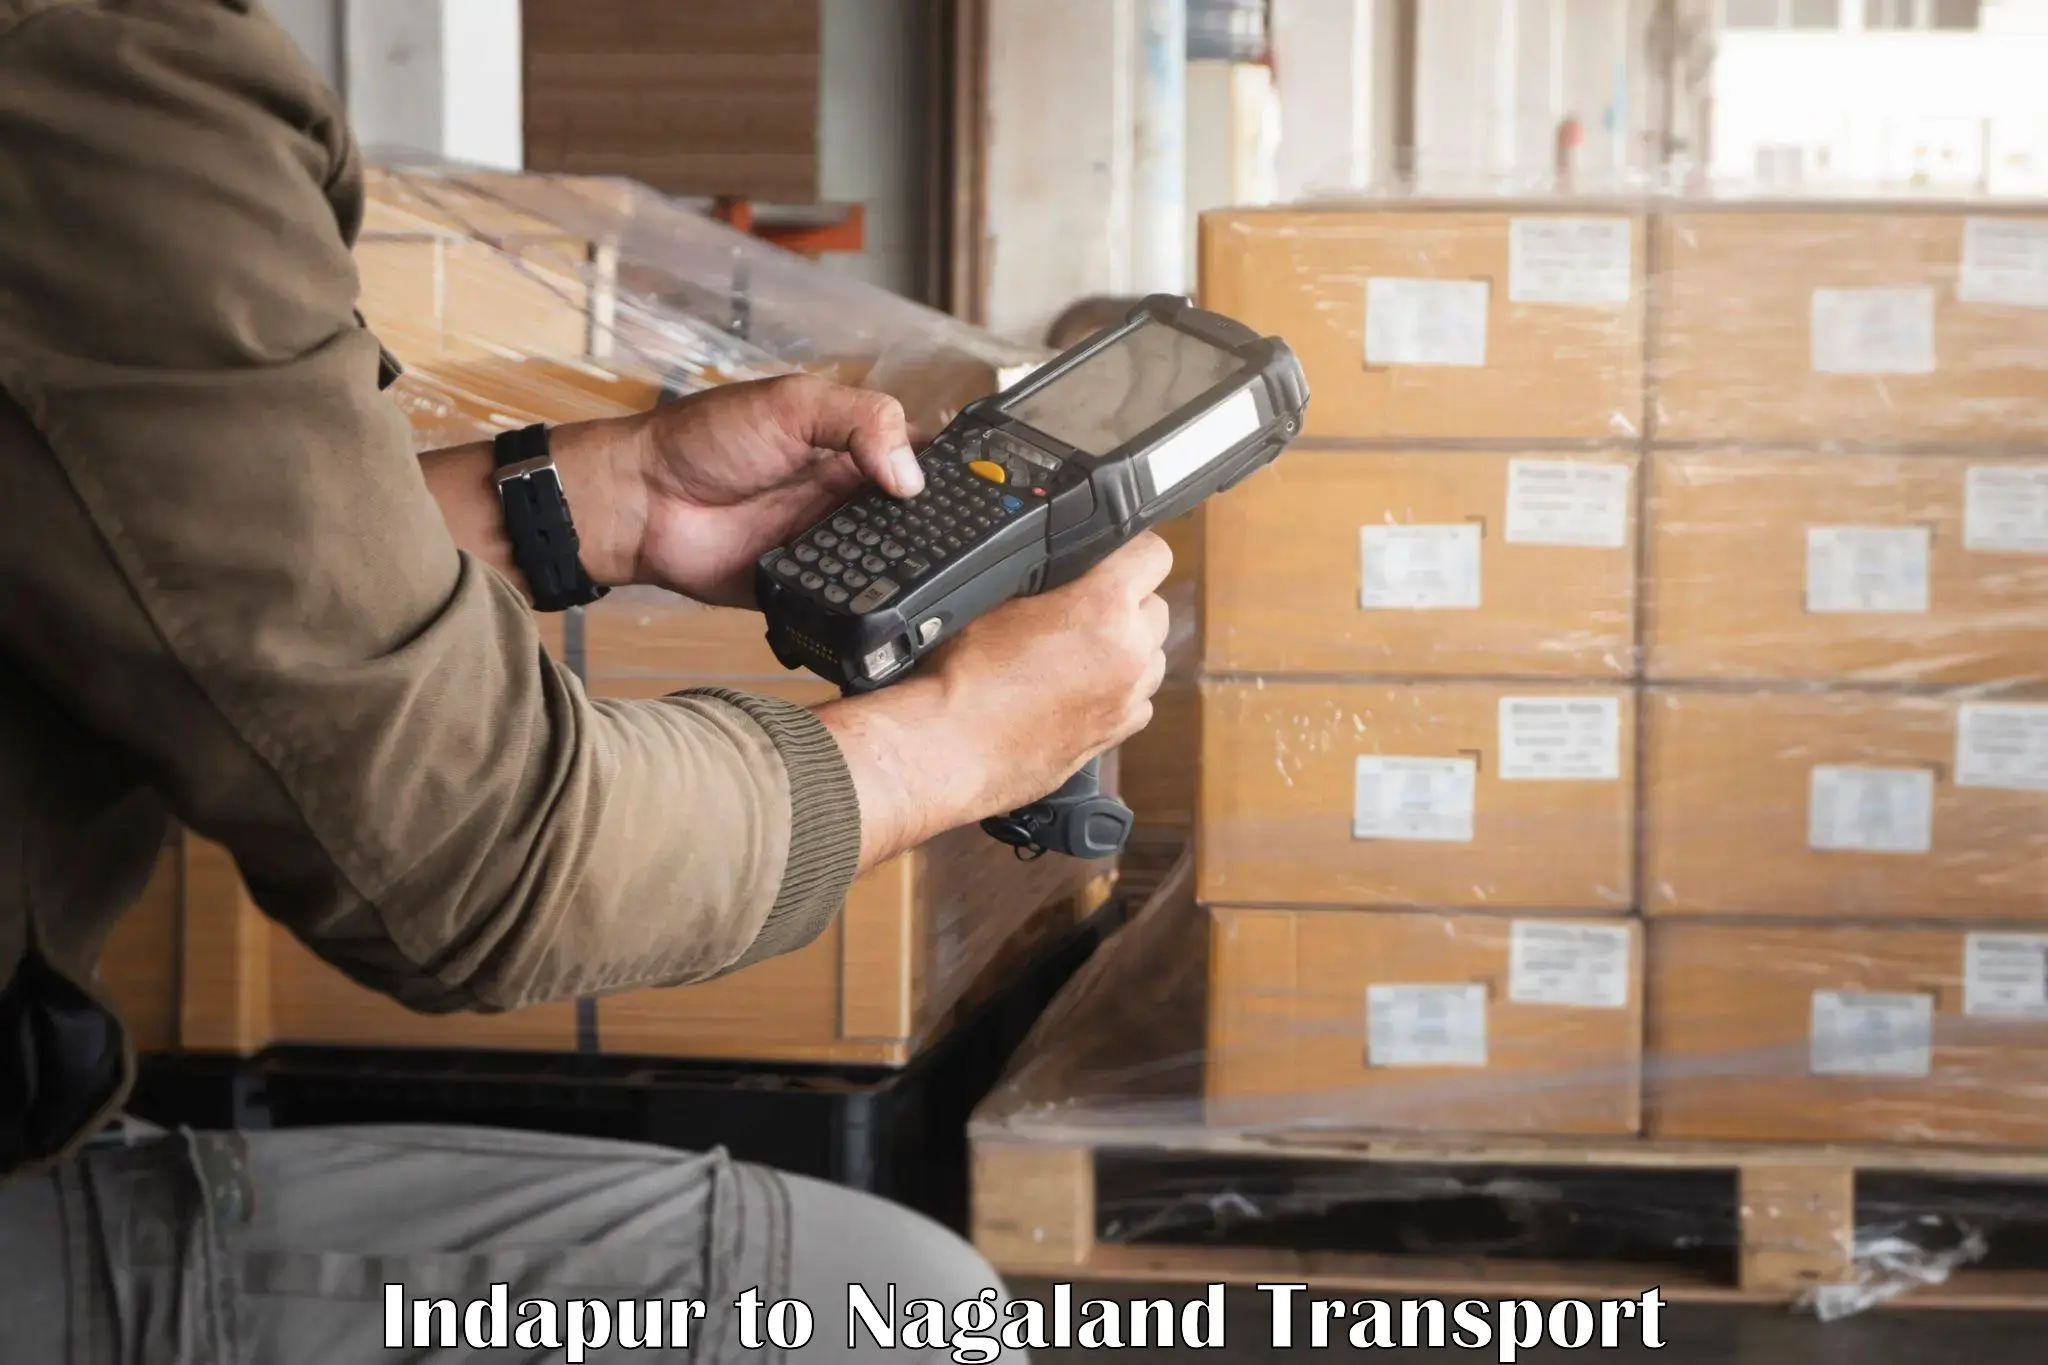 Container transport service Indapur to Nagaland